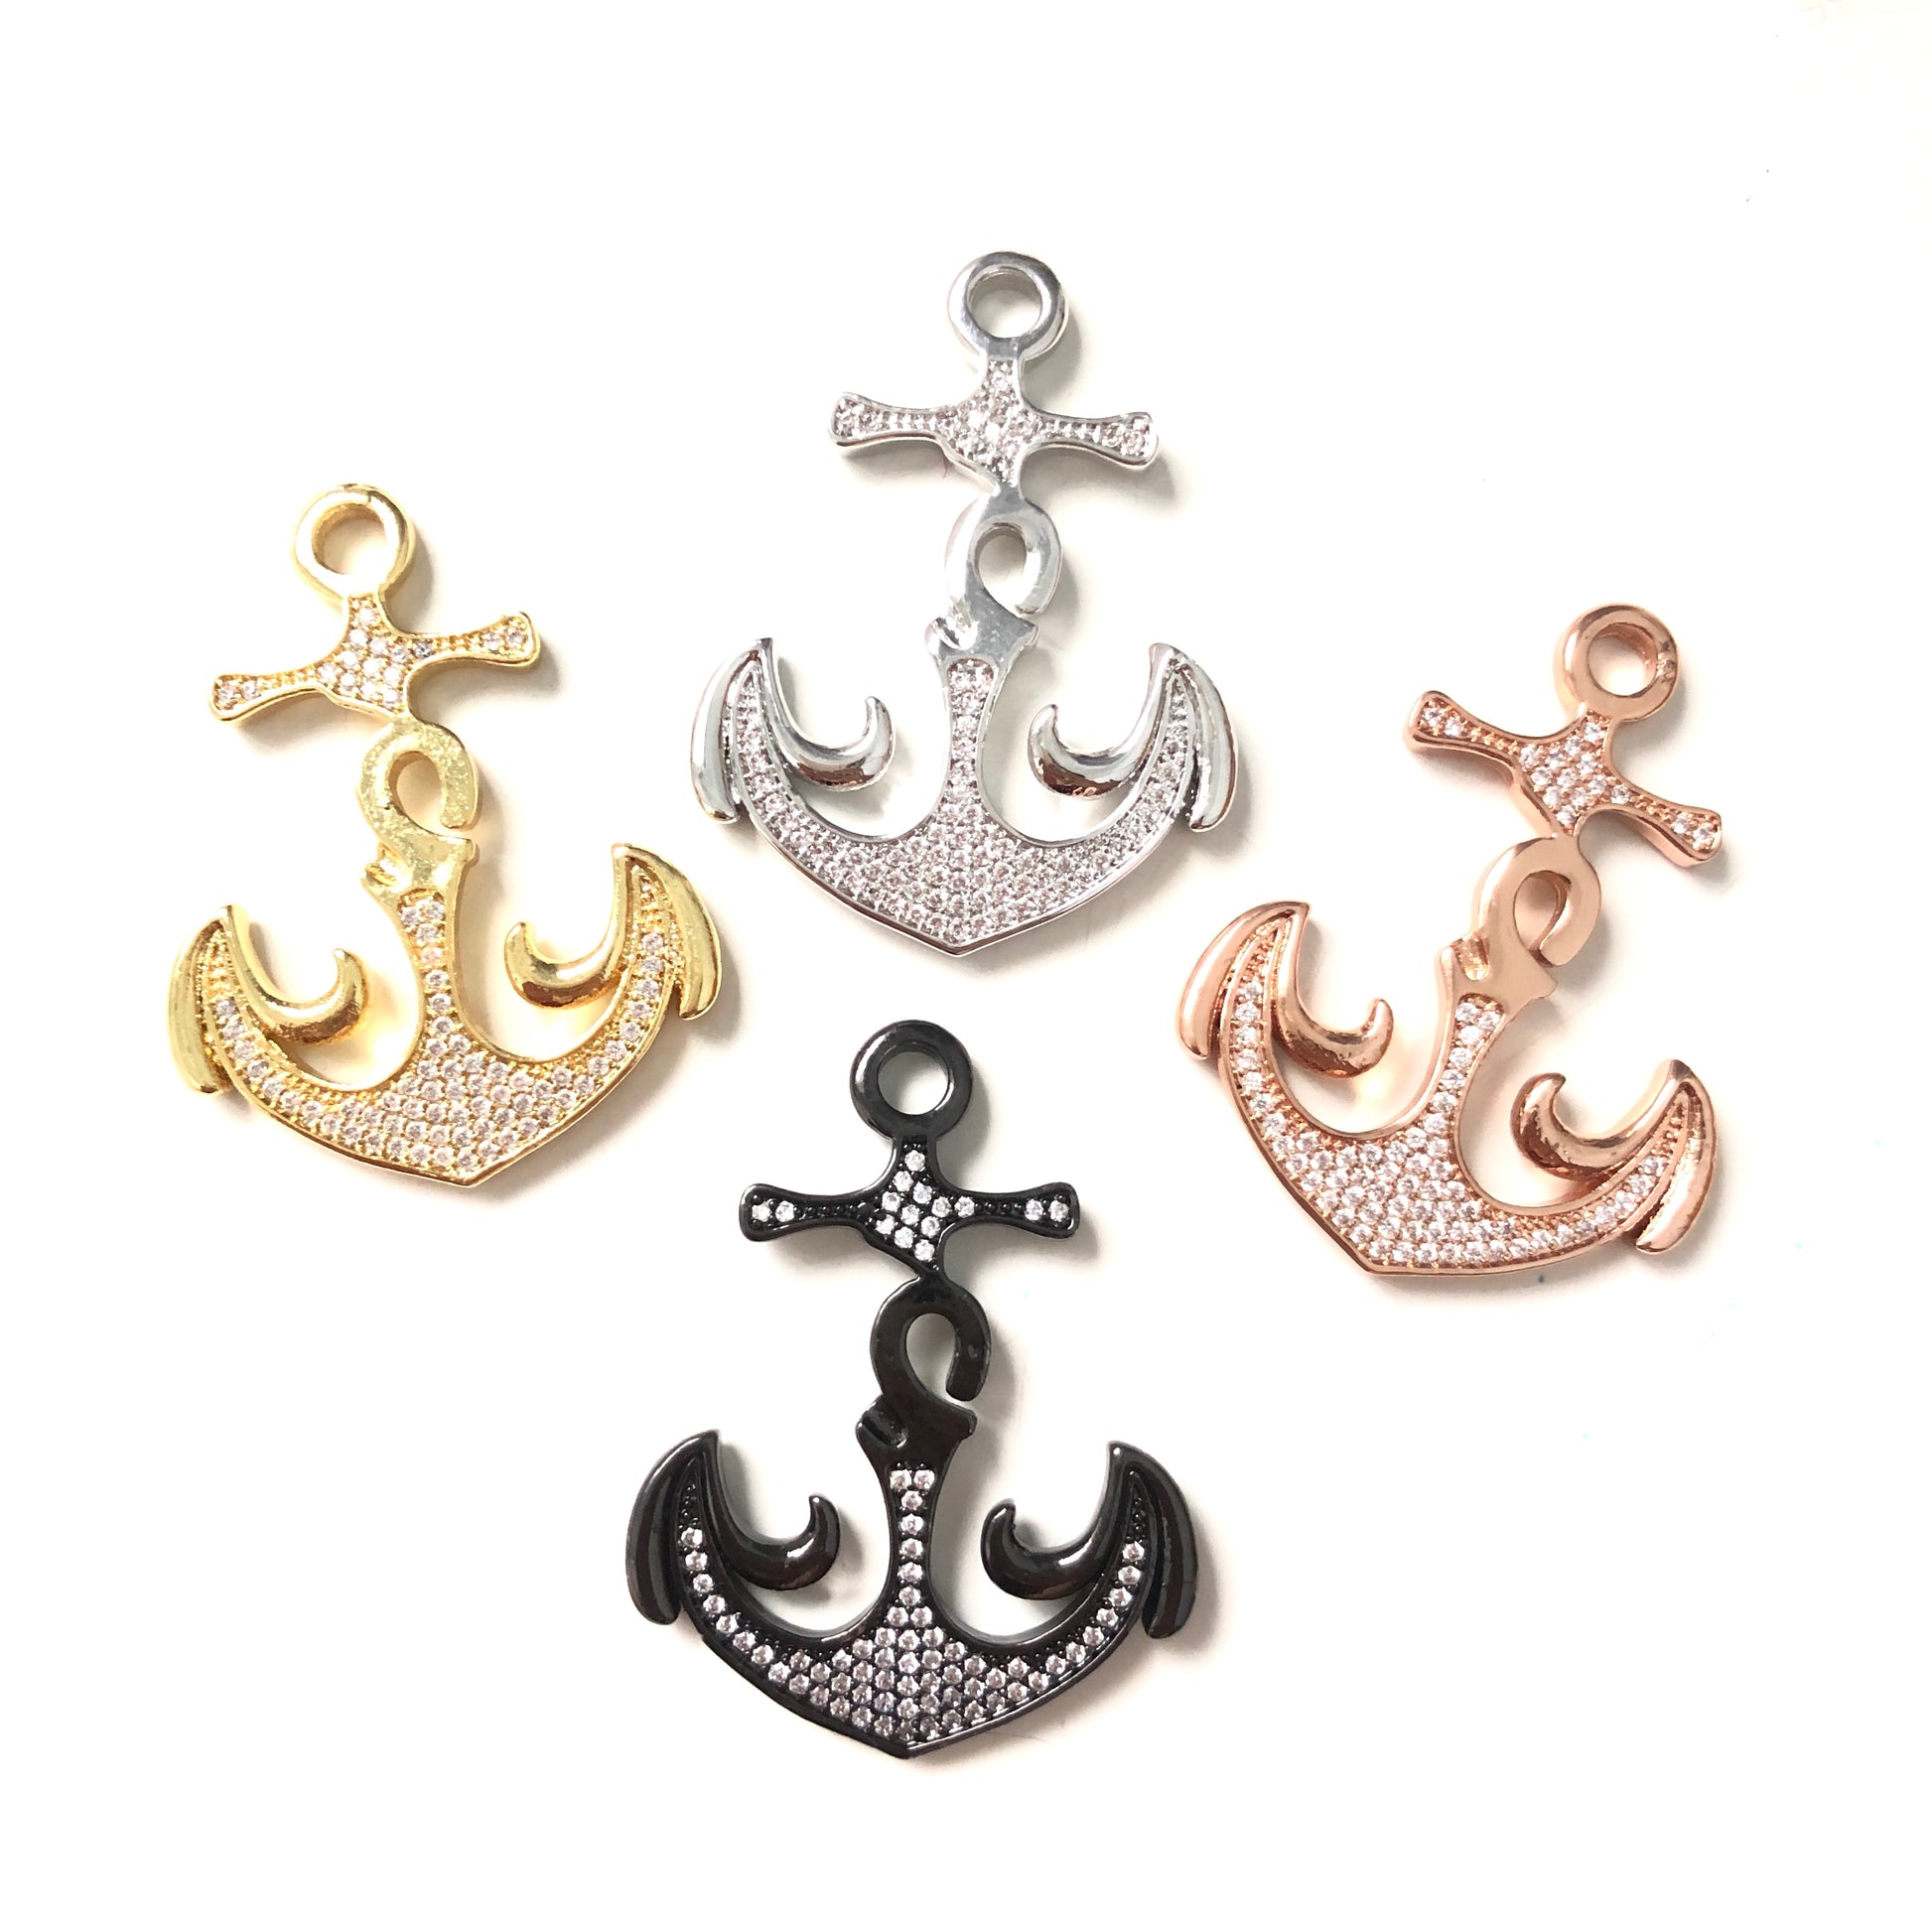 10pcs/lot 40*31mm CZ Paved Anchor Charms CZ Paved Charms Large Sizes Symbols Charms Beads Beyond